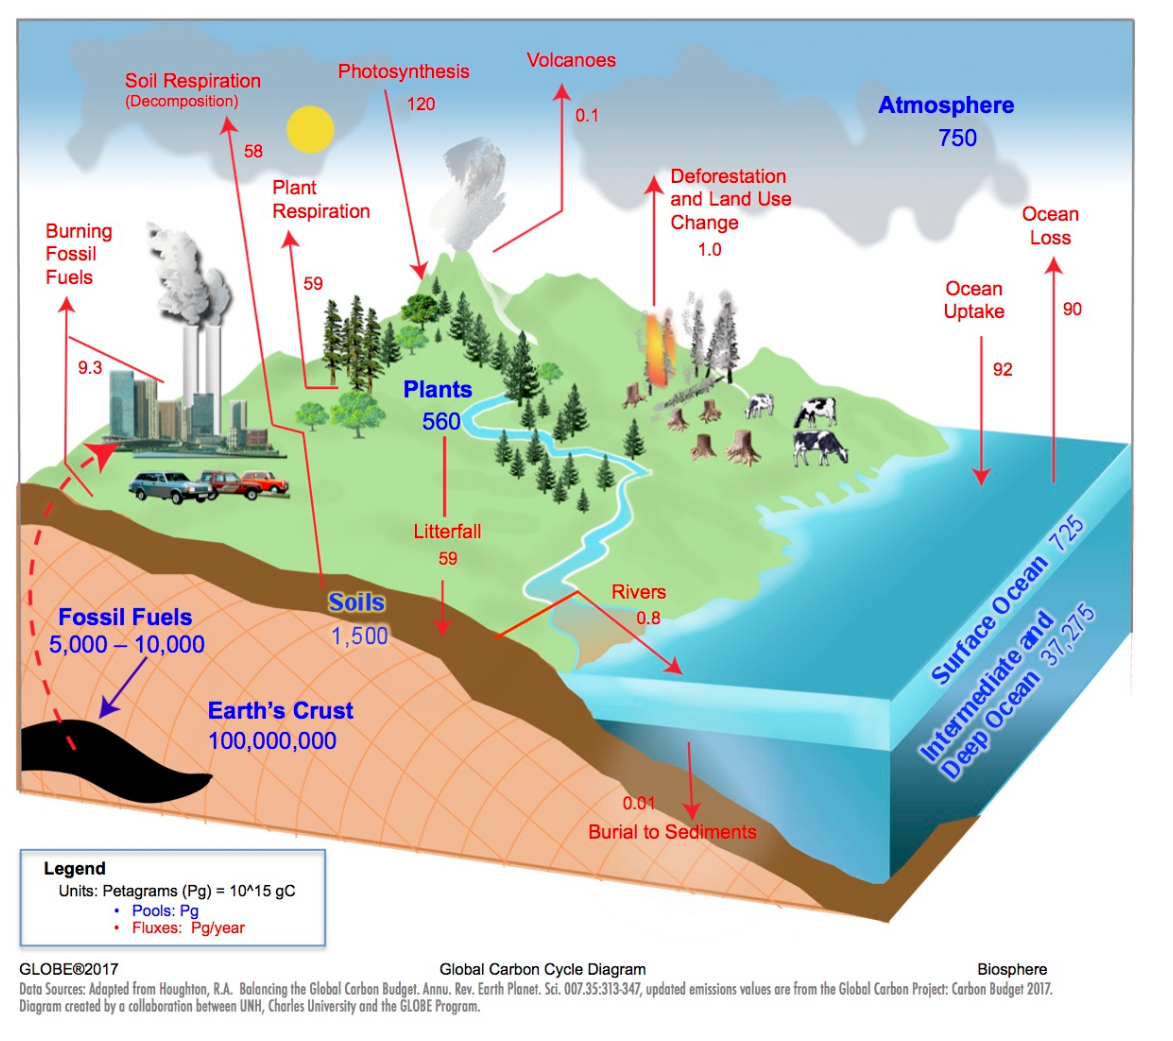 Global Carbon Cycle Diagram, showing how pollutants, plant and soil respiration, volcanos, deforestation and other activities can affect the atmosphere.